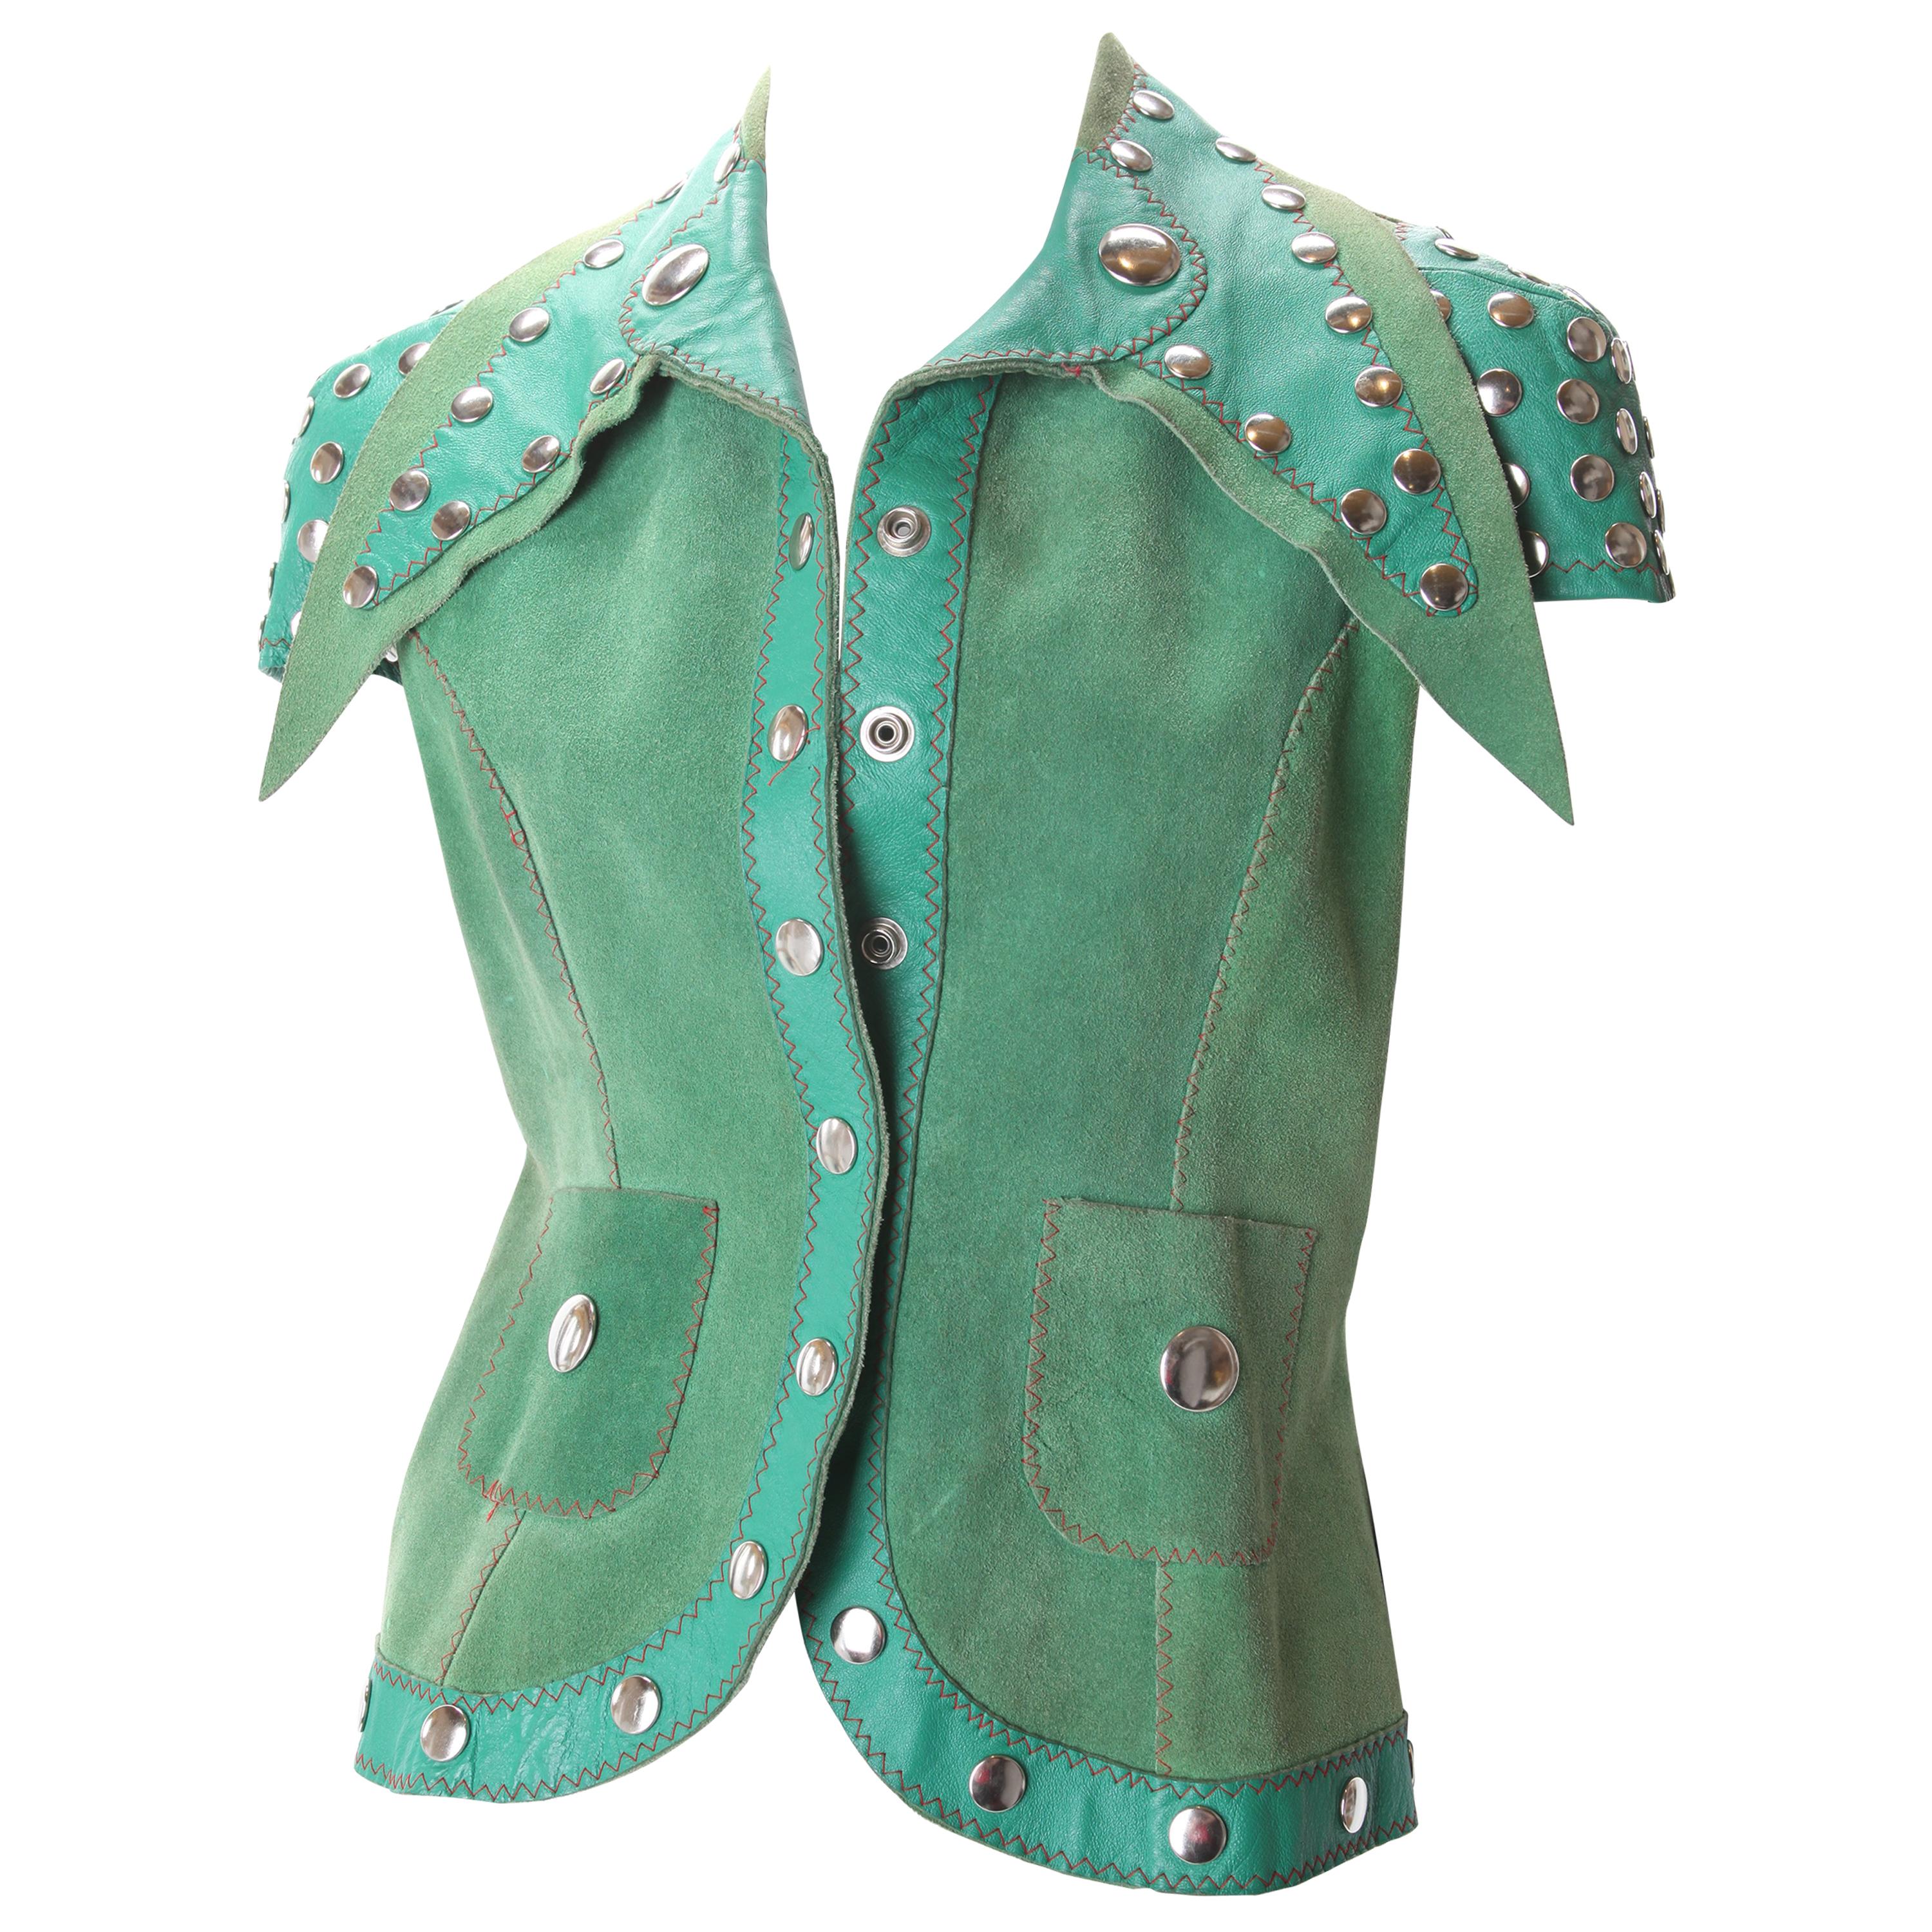 Stephen Burrows Green Suede & Leather Studded Vest, c.1970s.